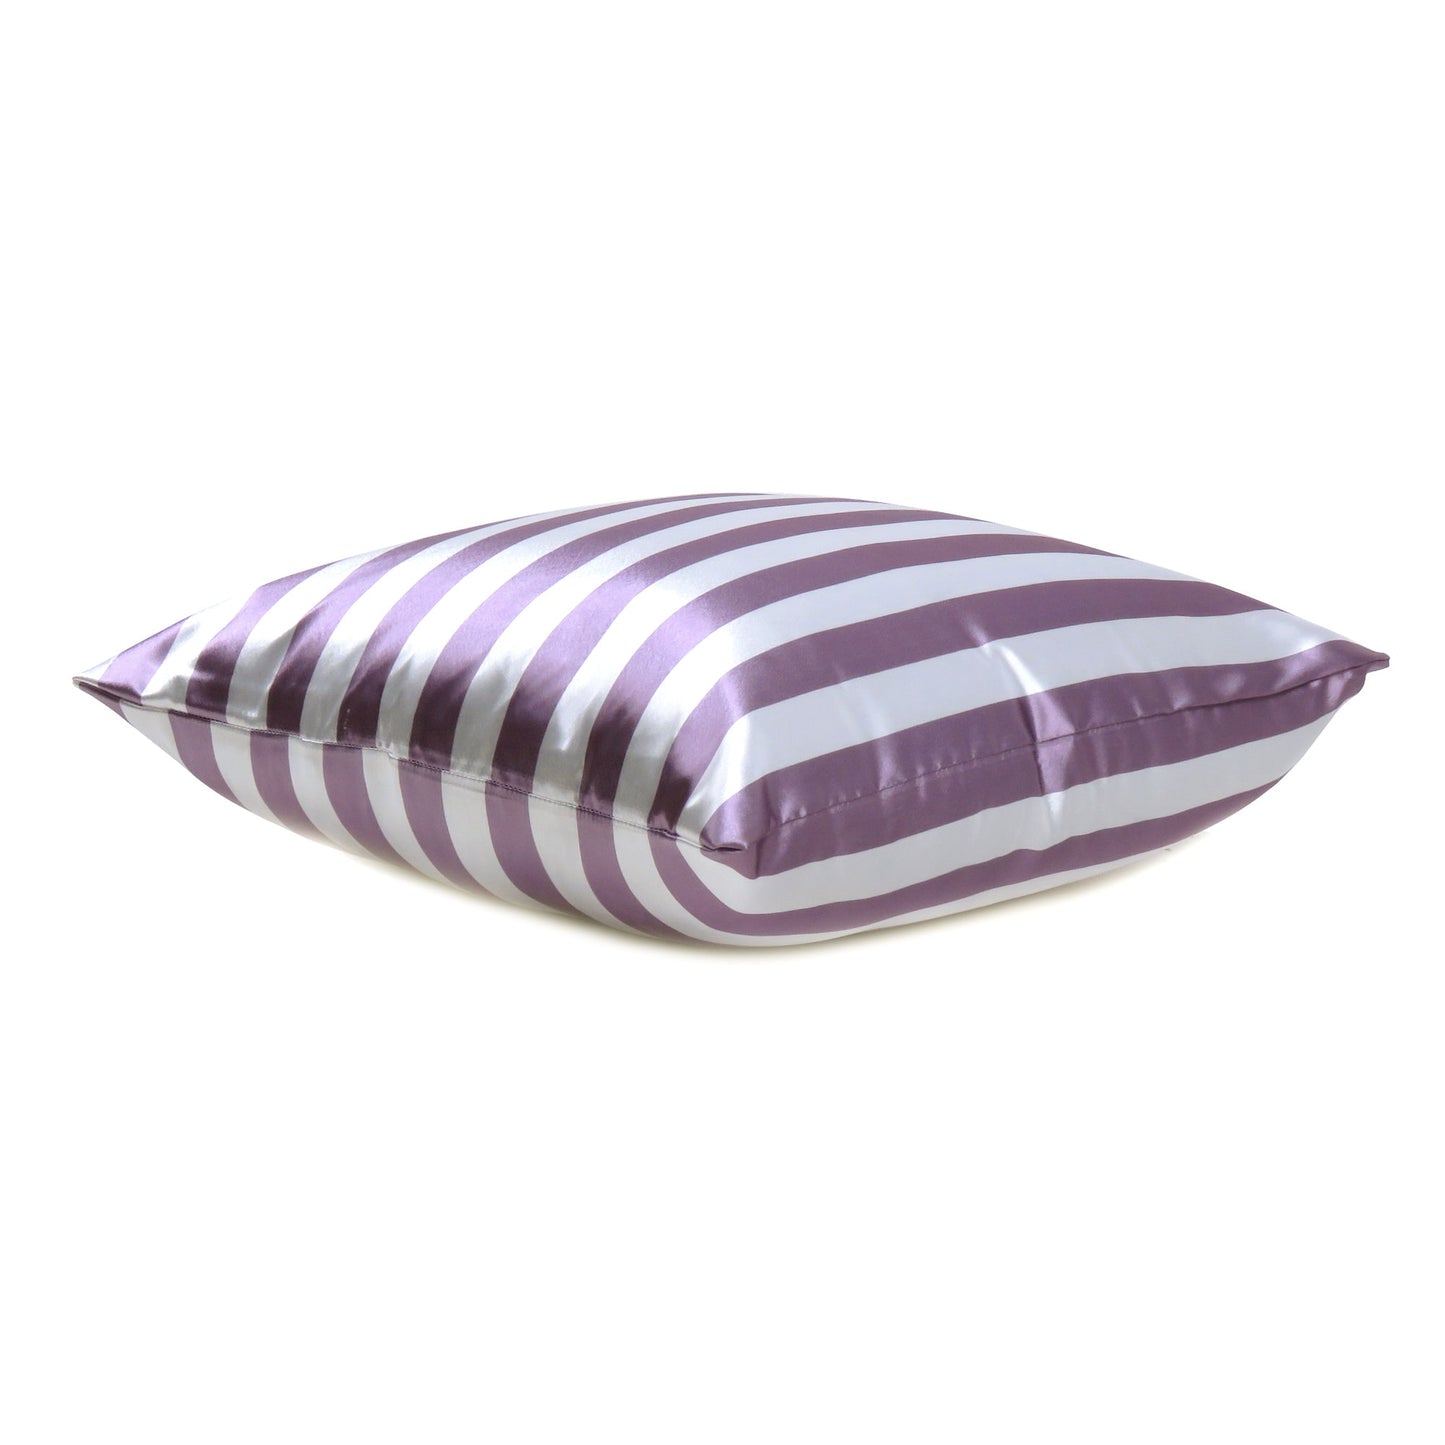 Bordeaux Purple Silky Striped Satin Silk Cushion Covers in Set of 2